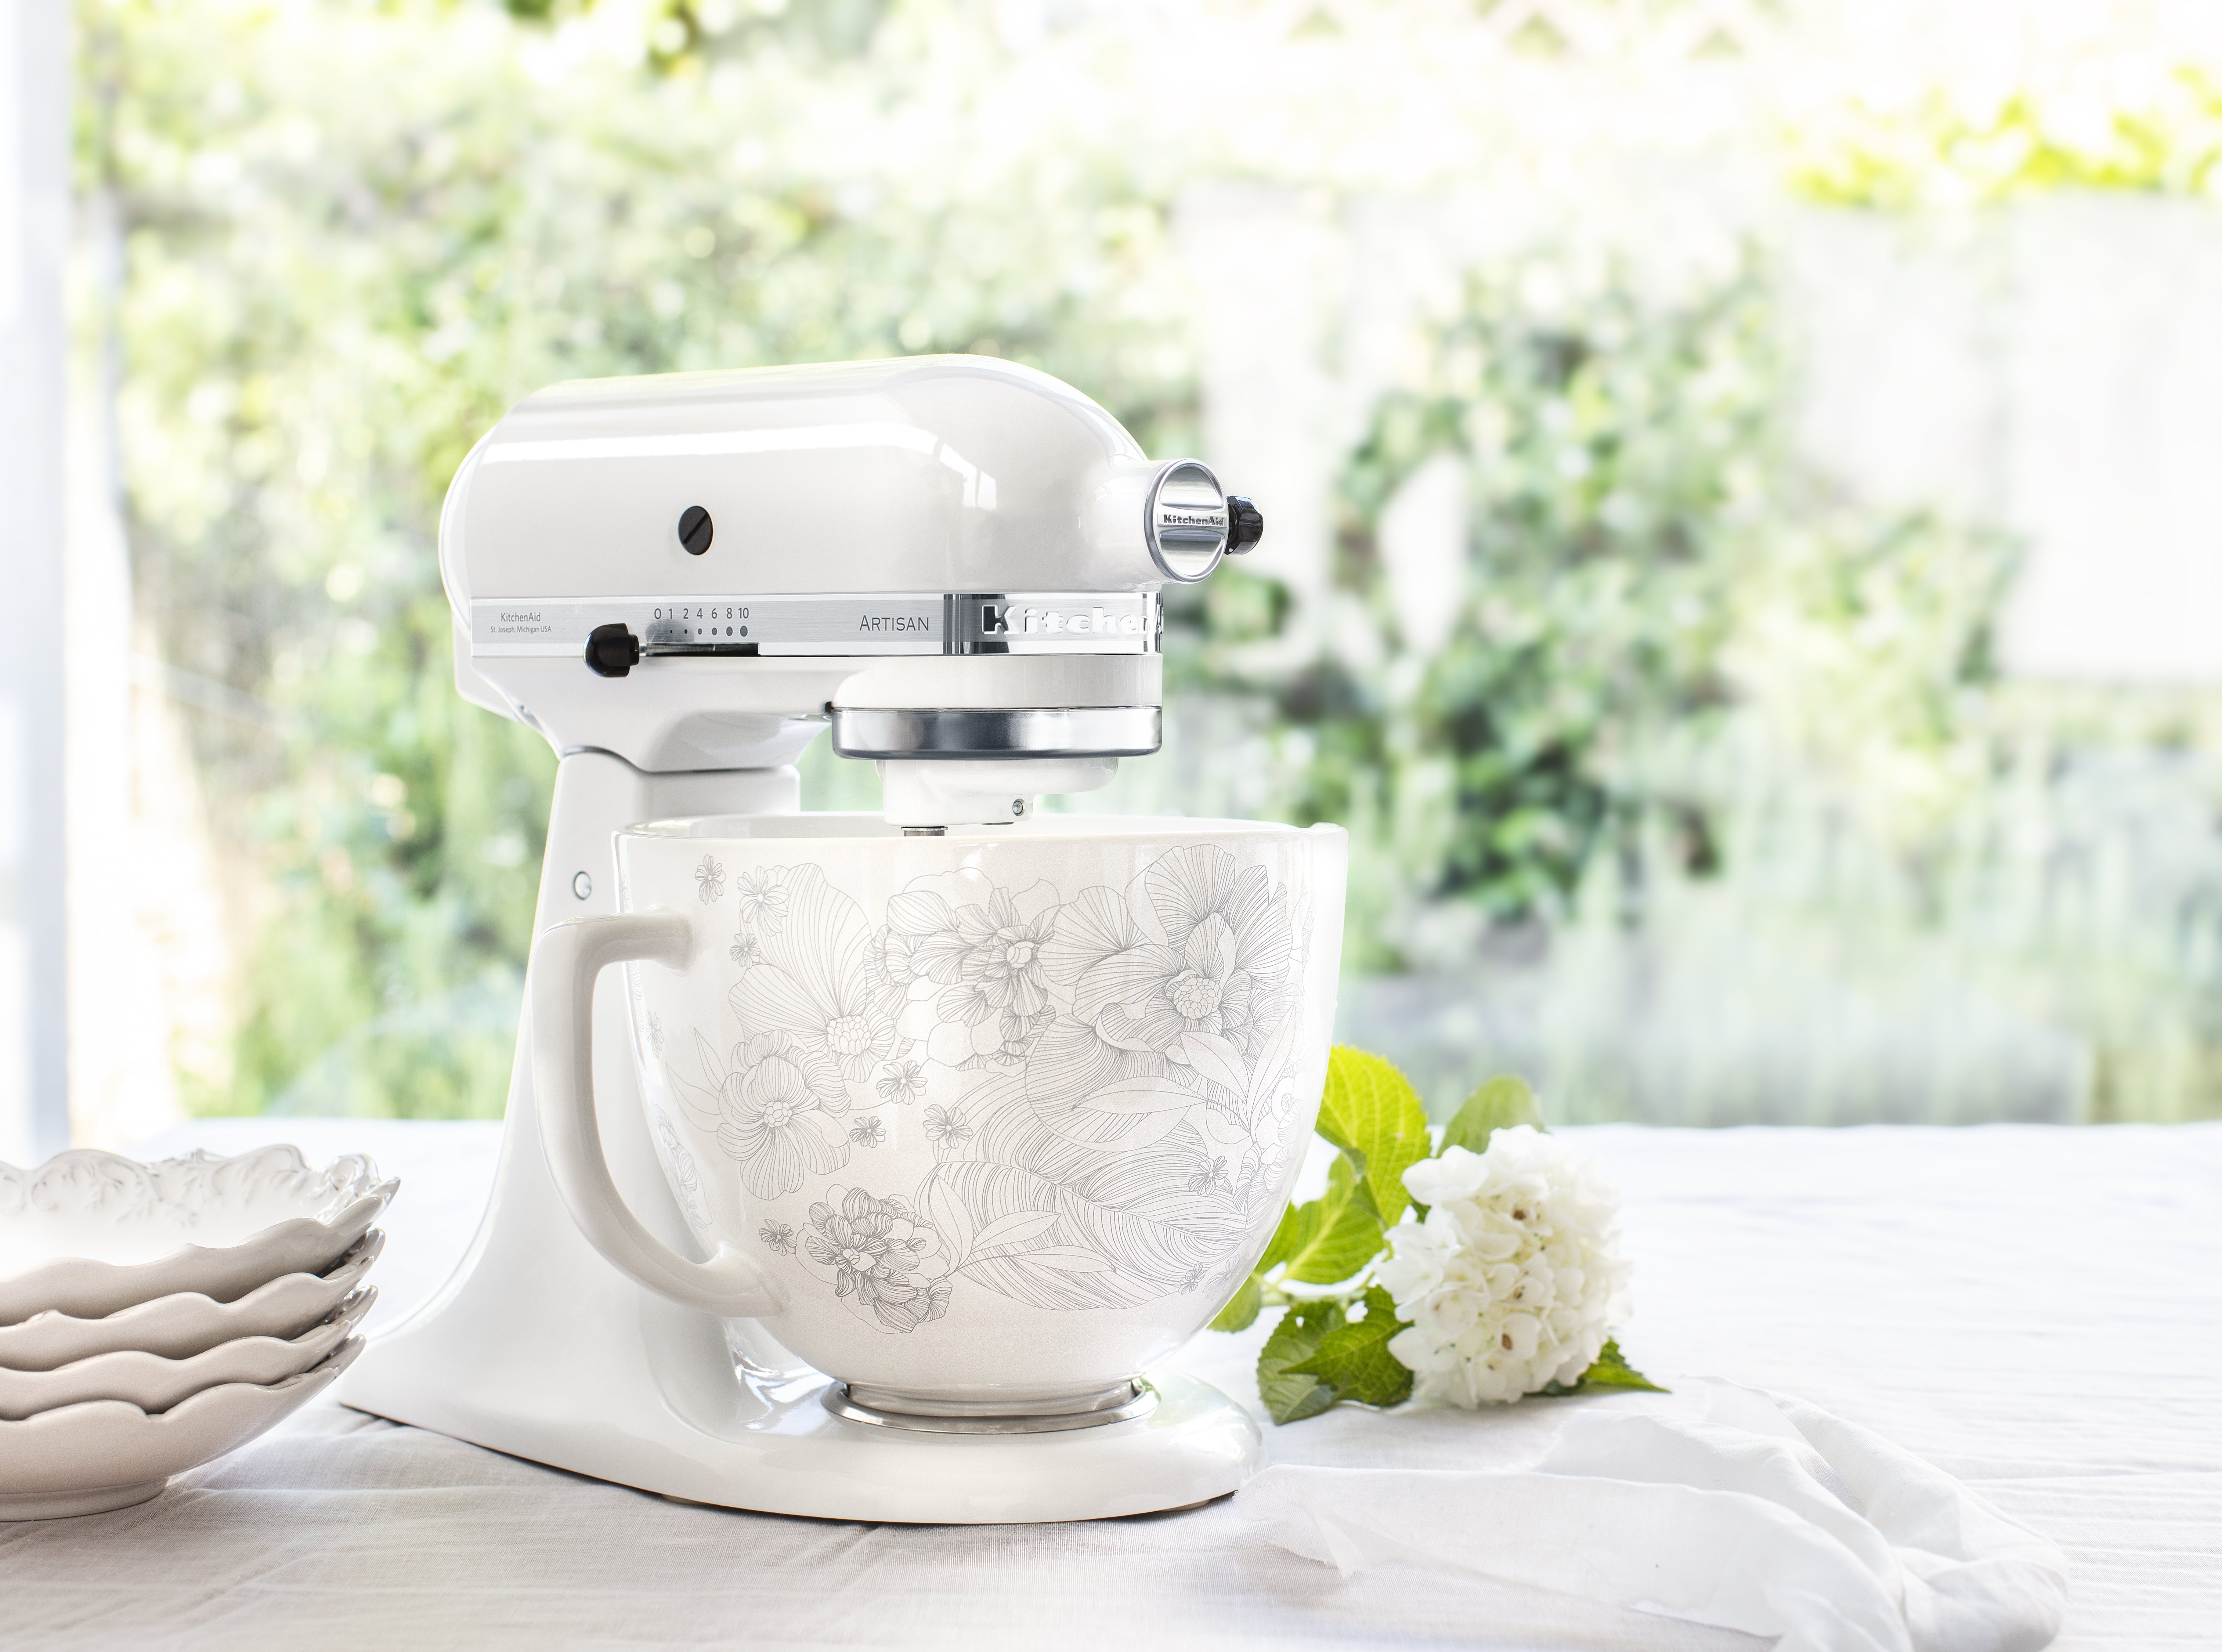 KitchenAid Artisan 5 qt Stand Mixer with the Mermaid Lace ceramic bowl.